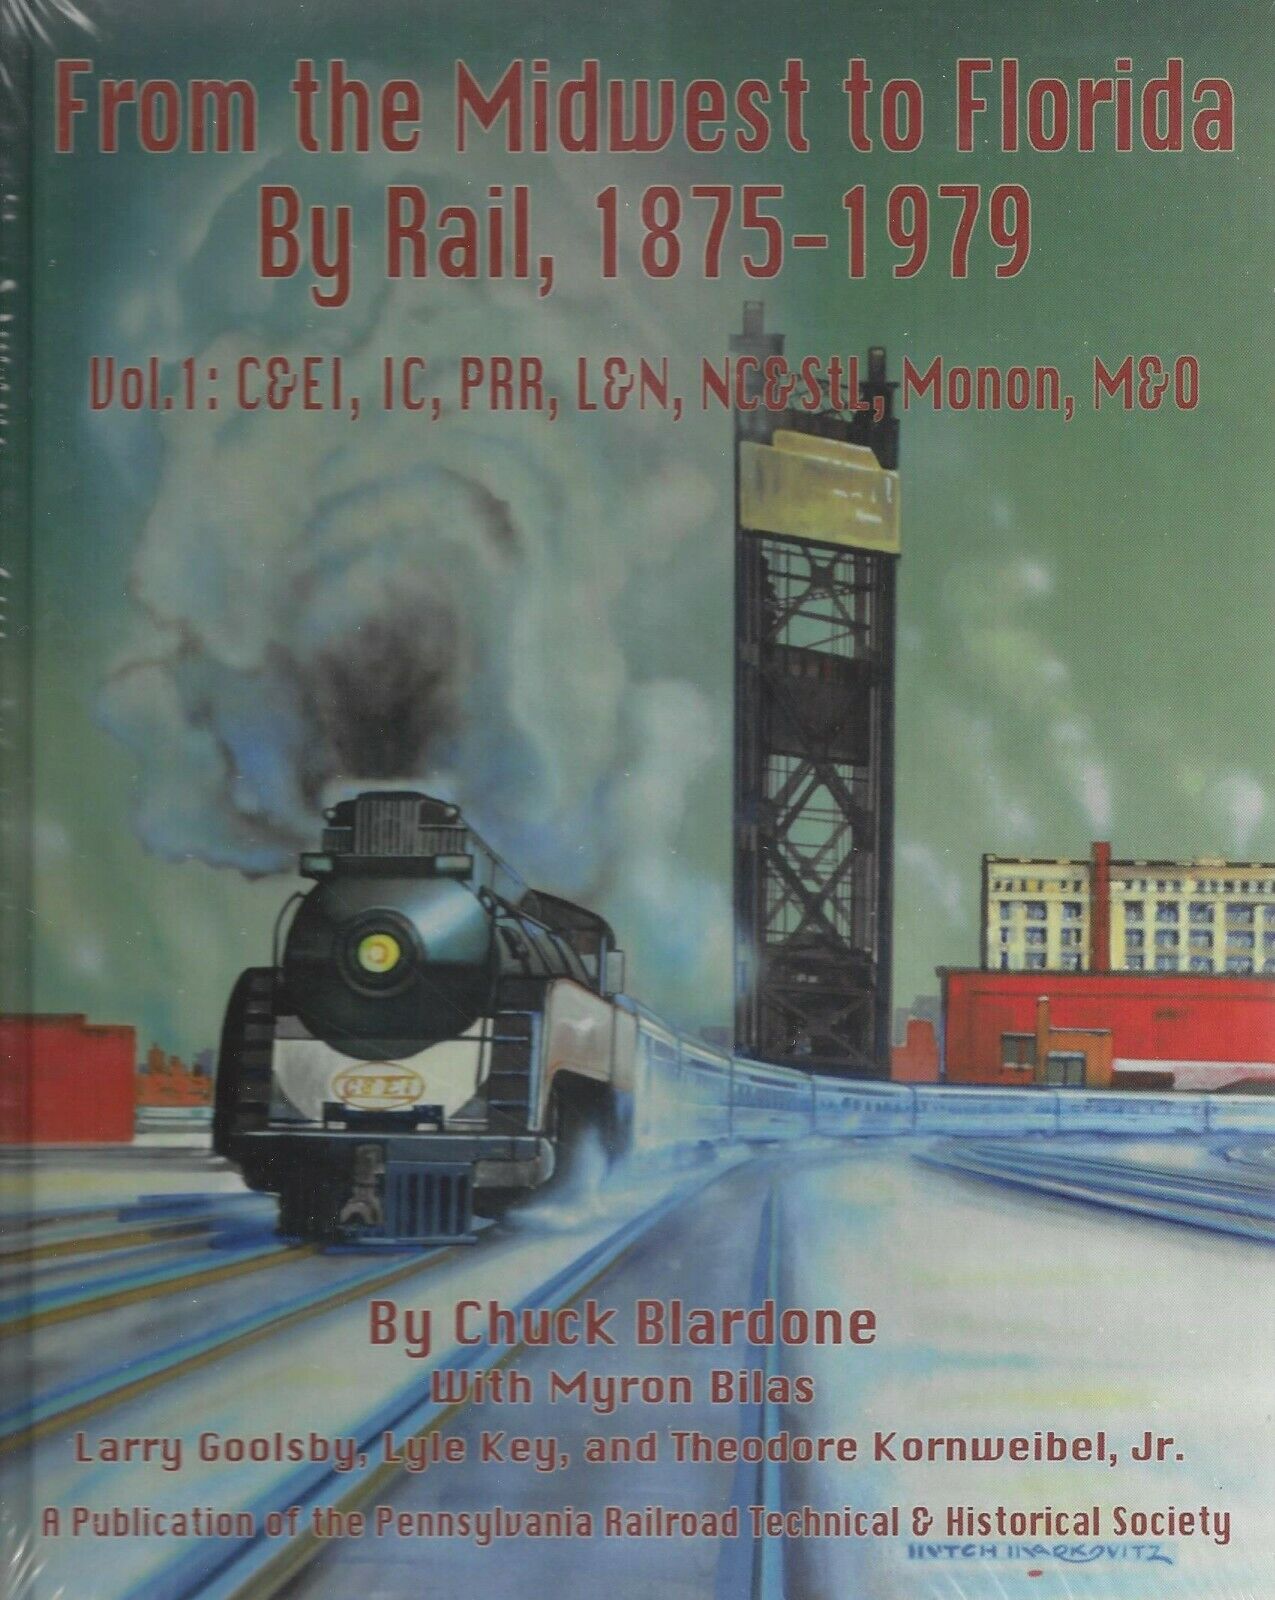 From the MIDWEST TO FLORIDA by Rail, Vol. 1 - (NEW HARDBOUND BOOK)